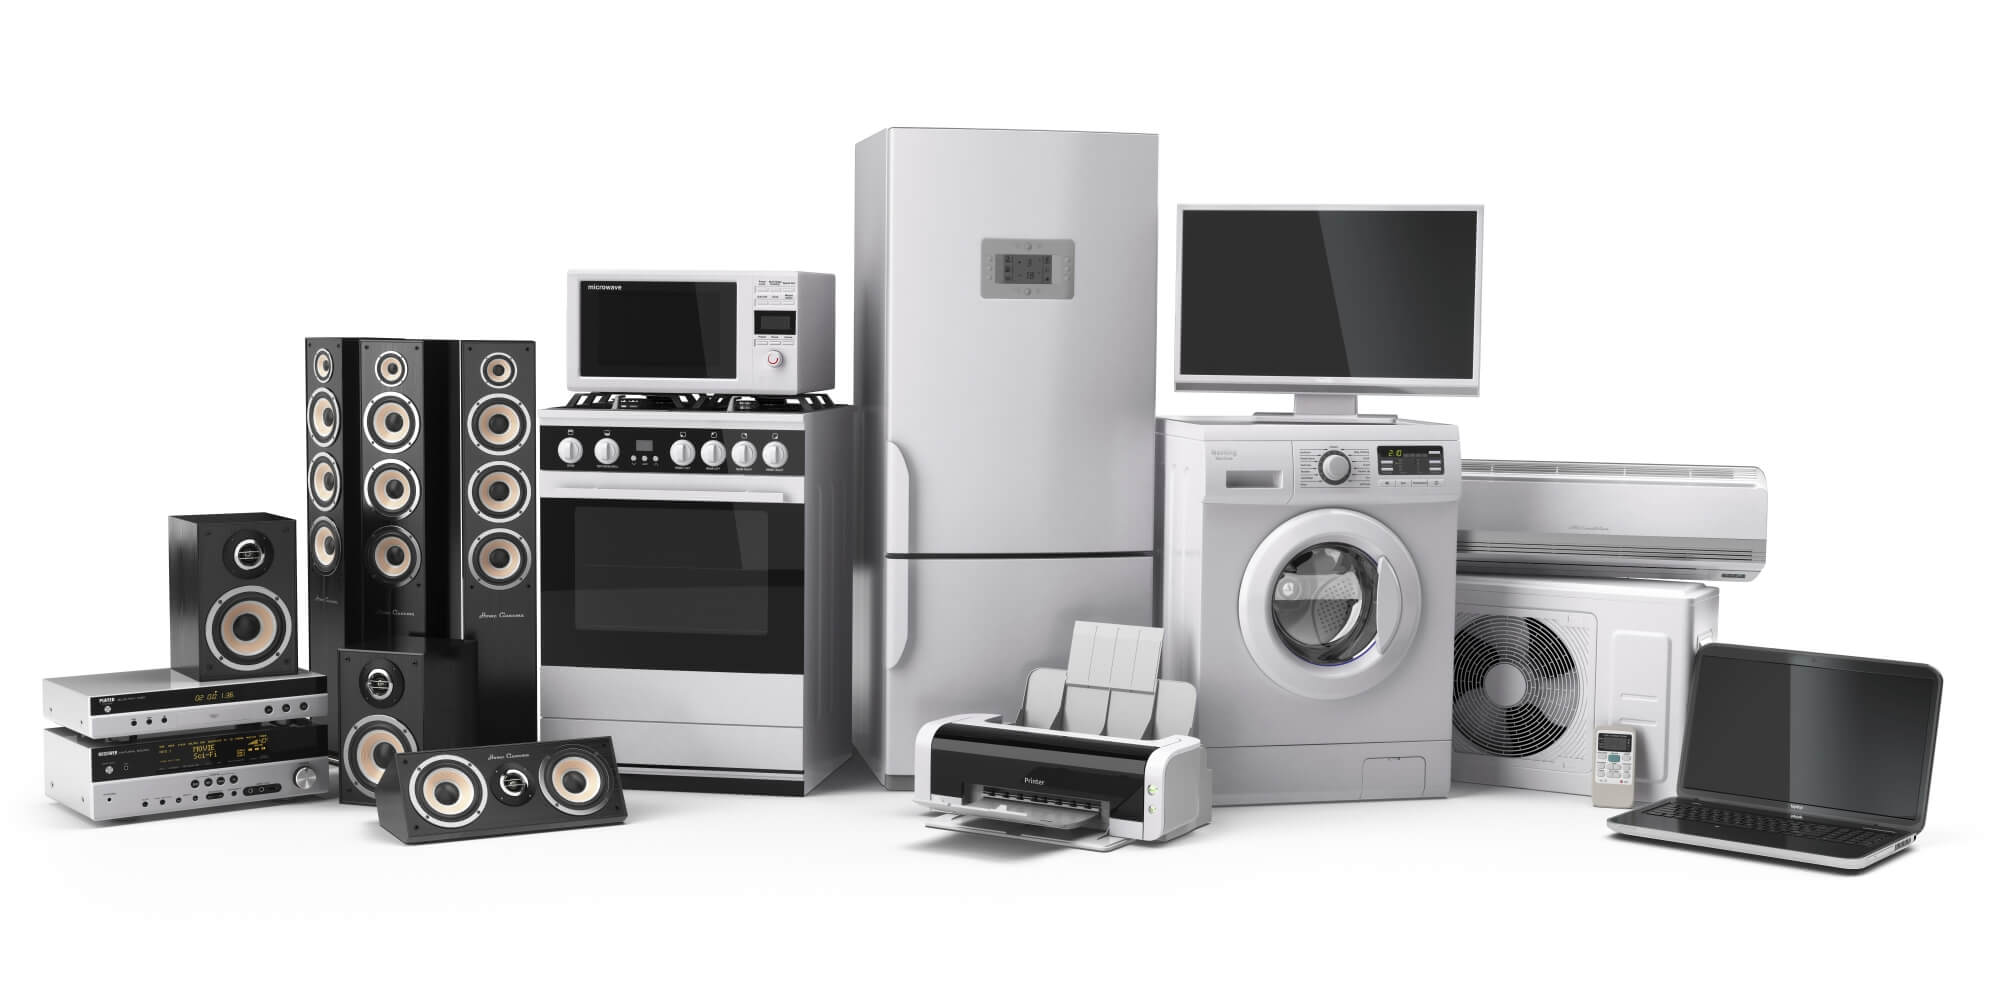 Local Crewkerne Appliance Installation Service South Somerset